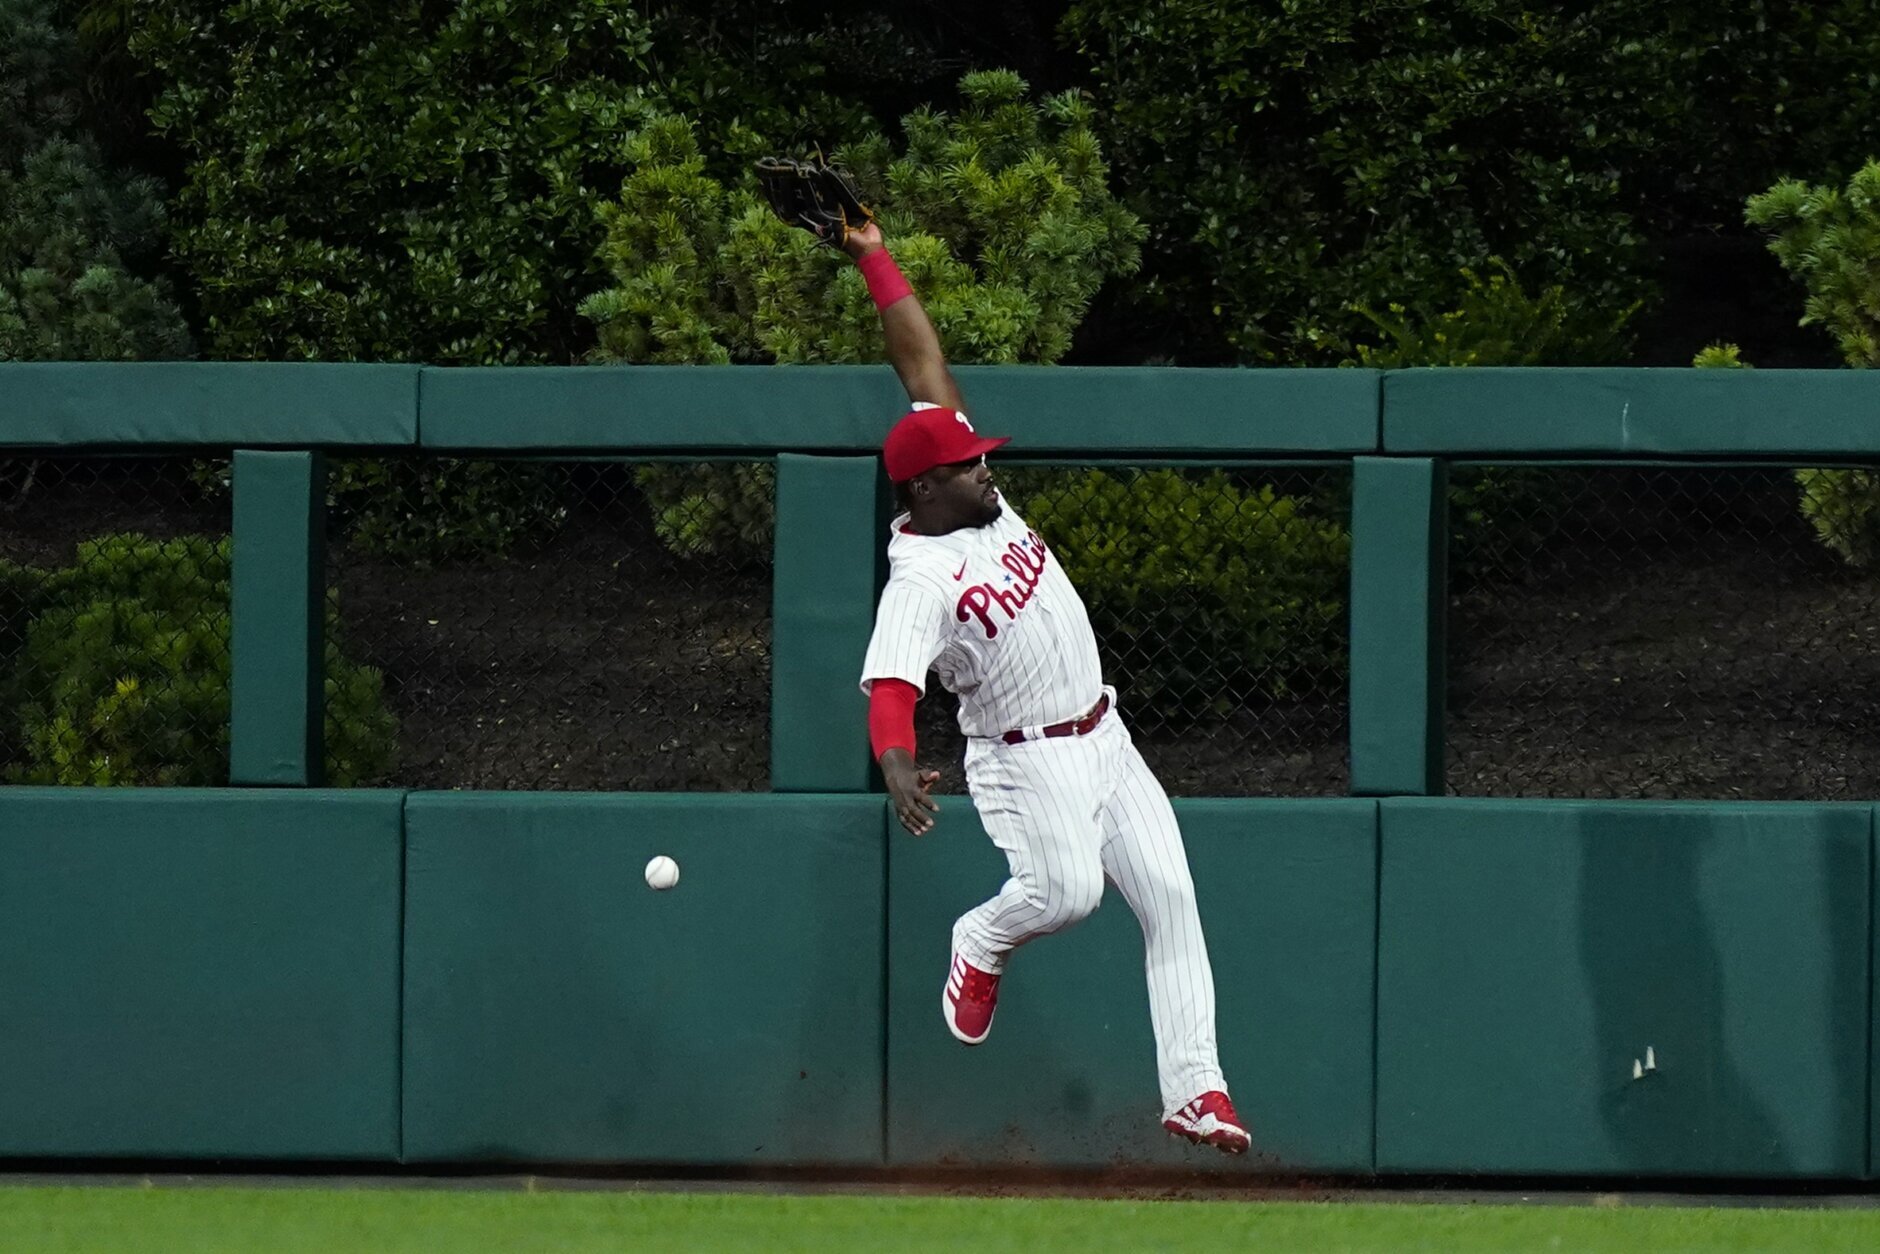 Hall homers, drives in 2, Phillies take series from Nats - WTOP News